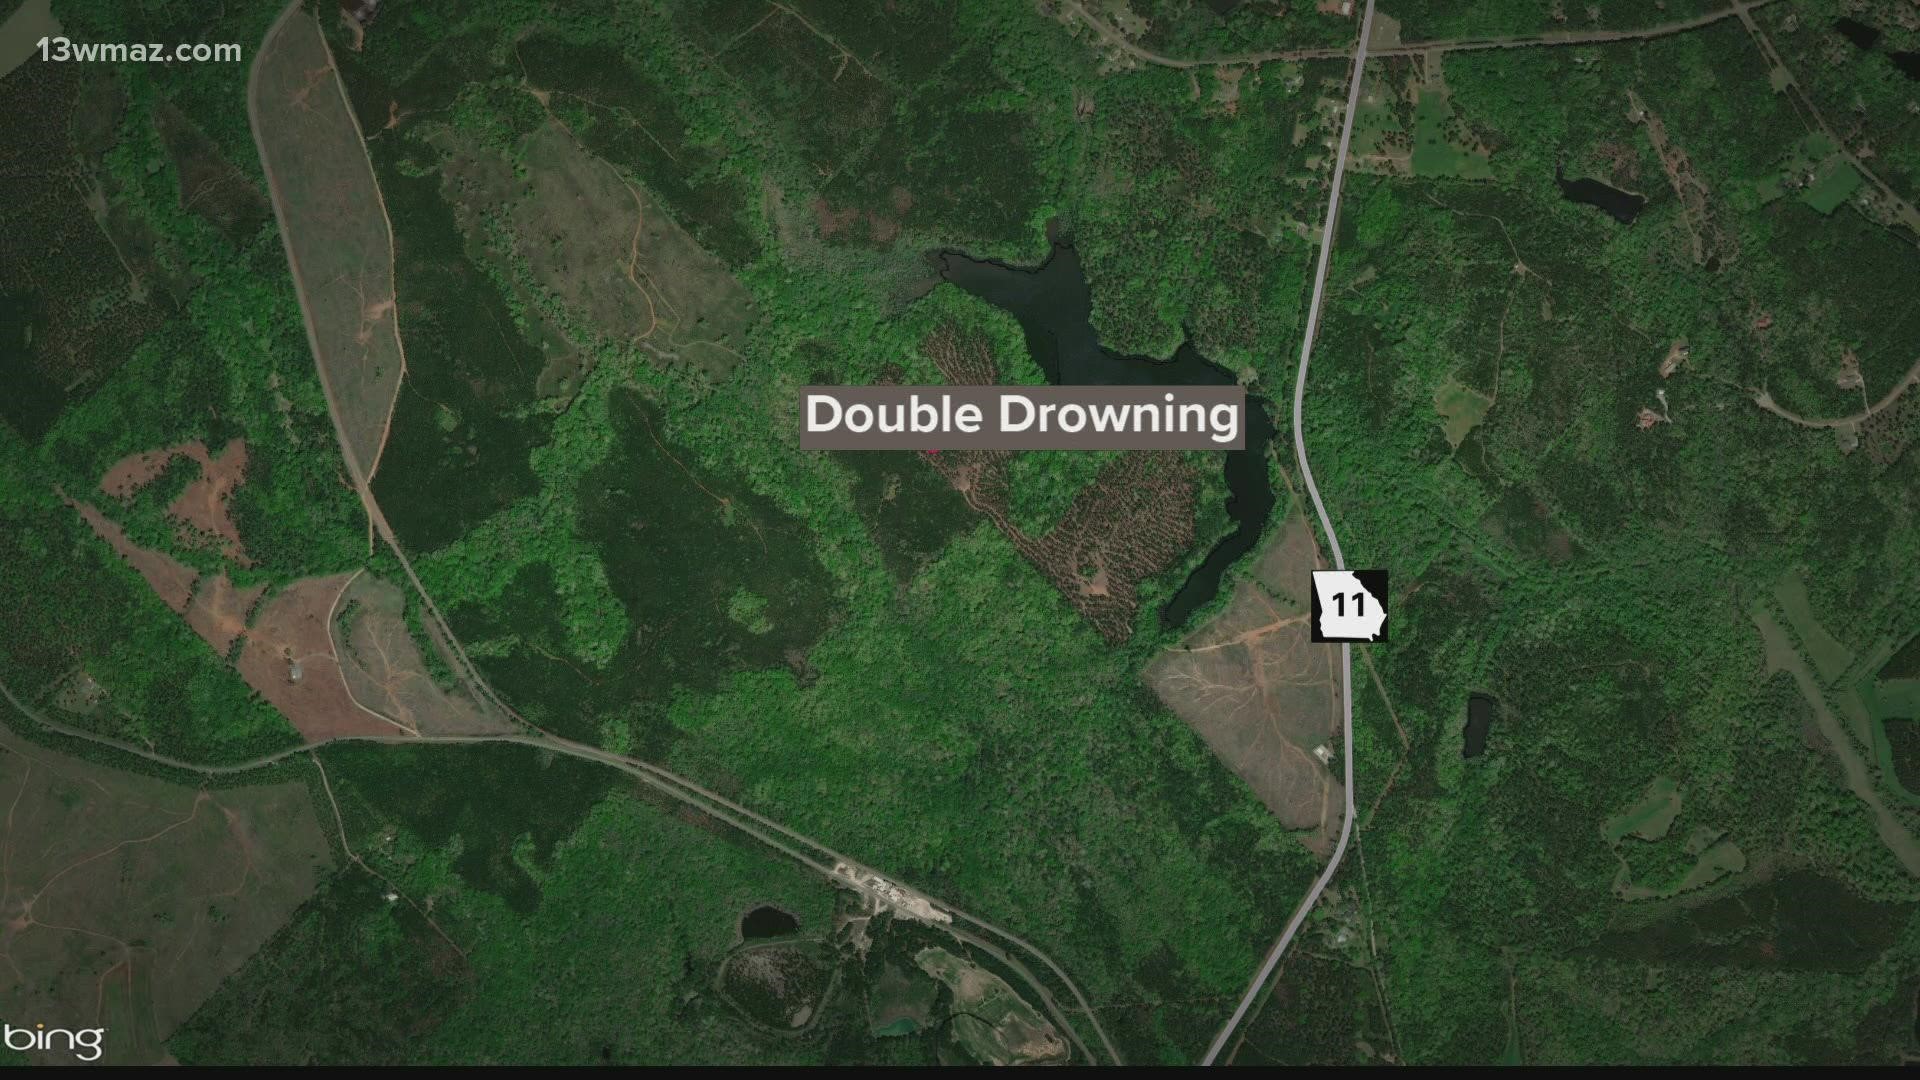 42-year-old Derrick Campbell and 25-year-old Devonte Campbell were found Tuesday after the boat they were in capsized.